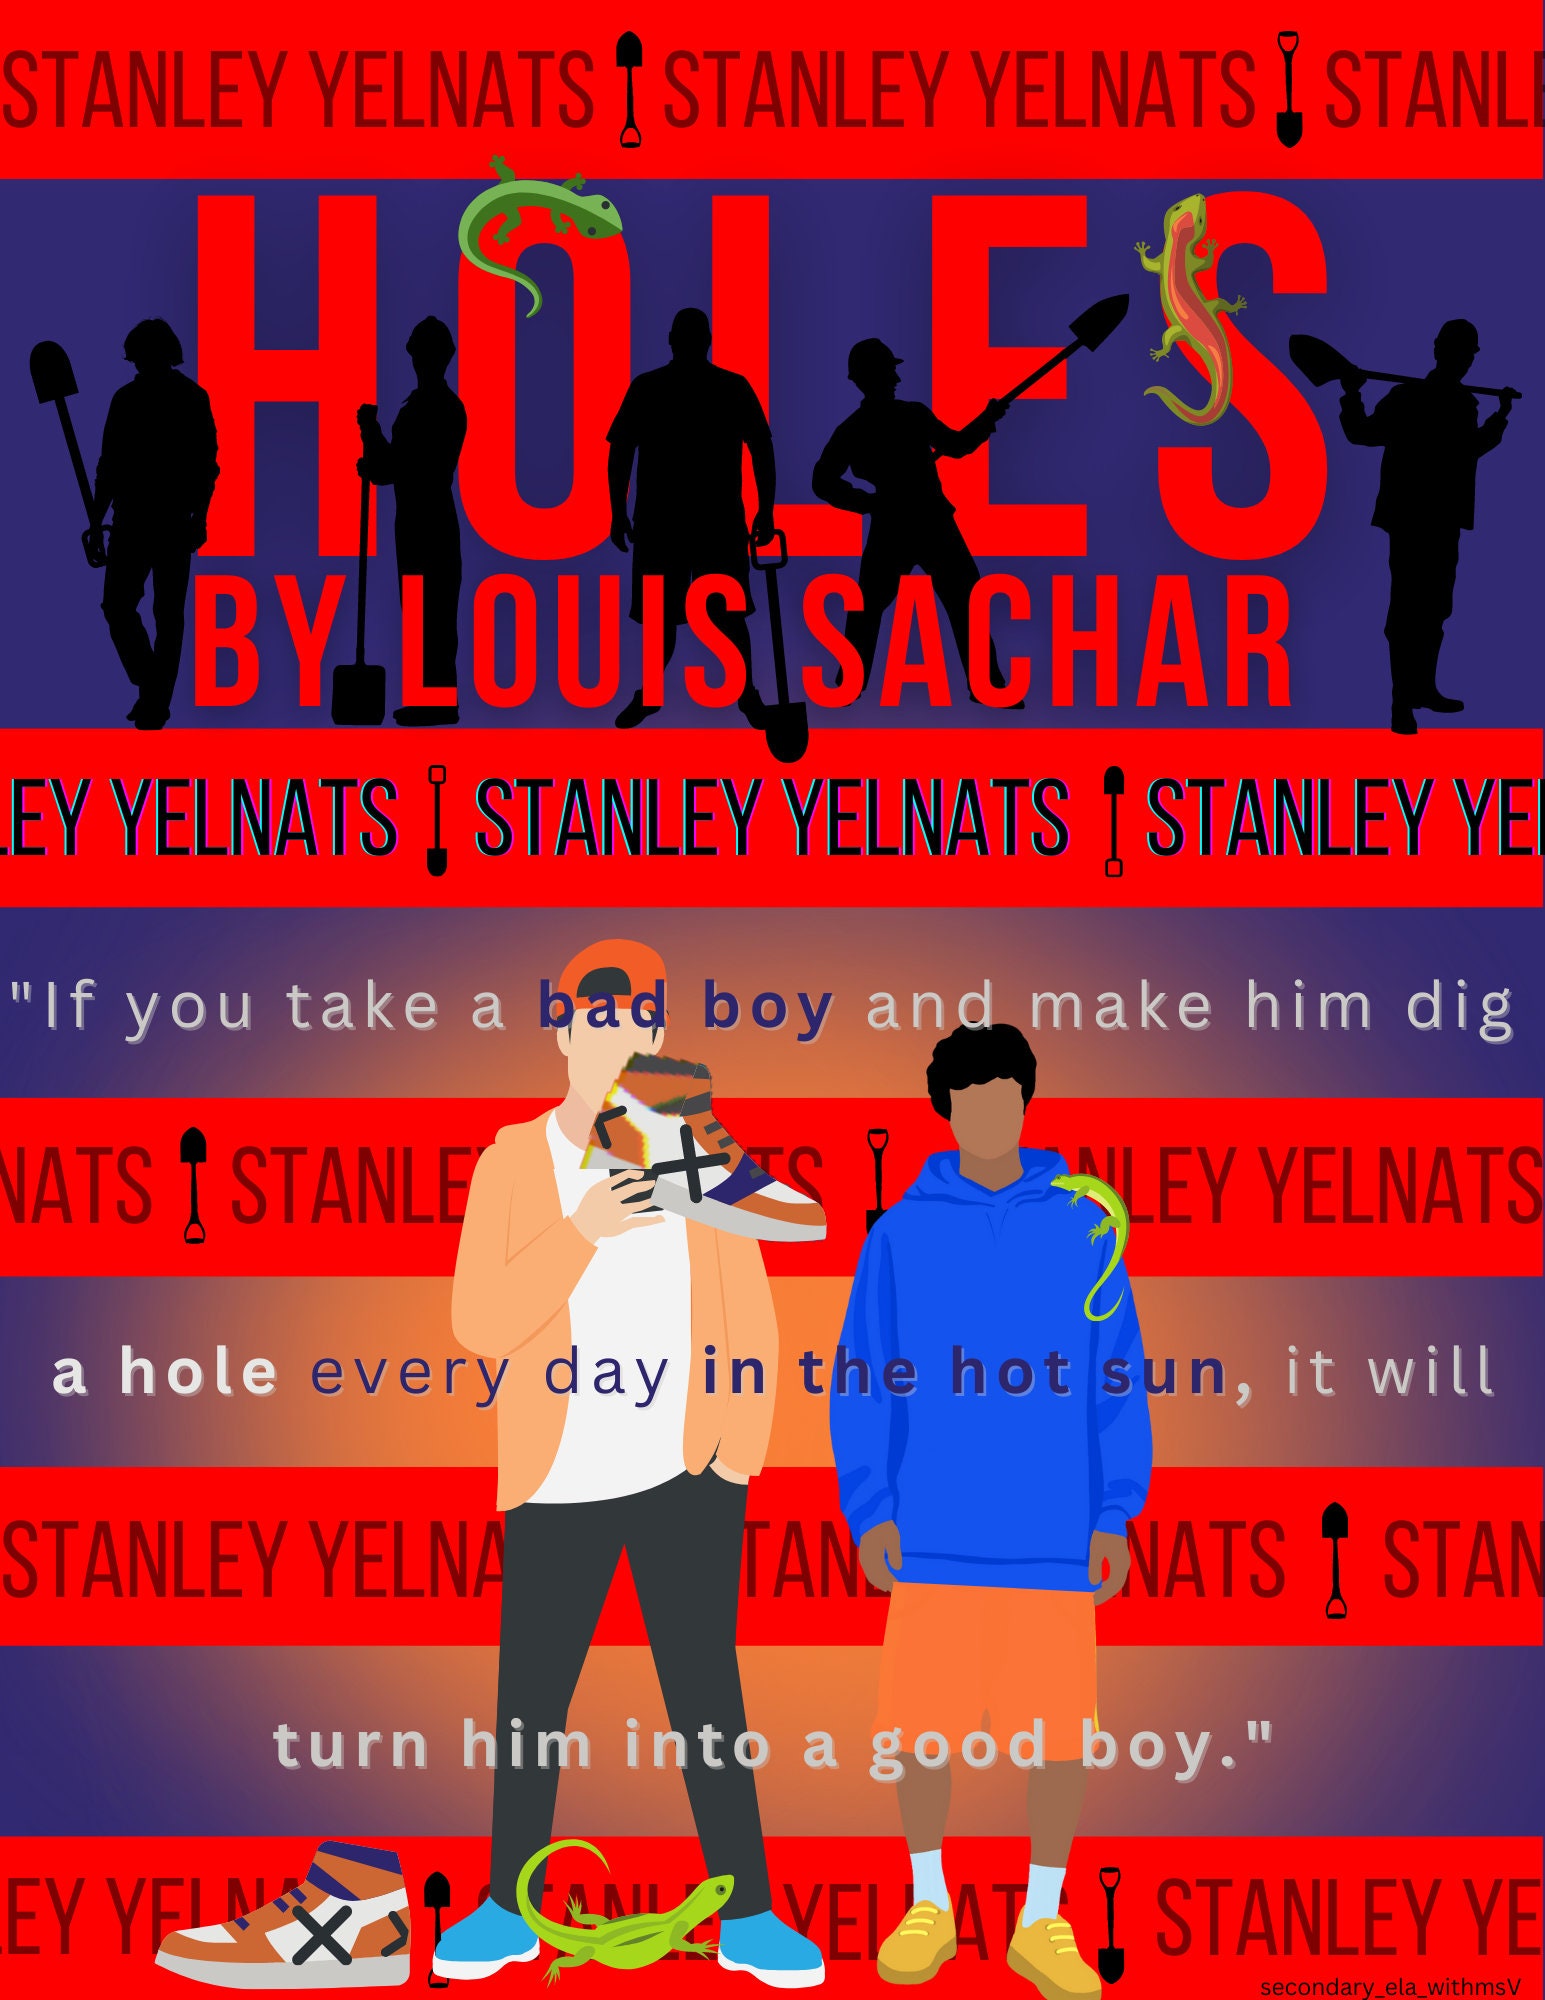 Stanley Yelnats in Holes by Louis Sachar